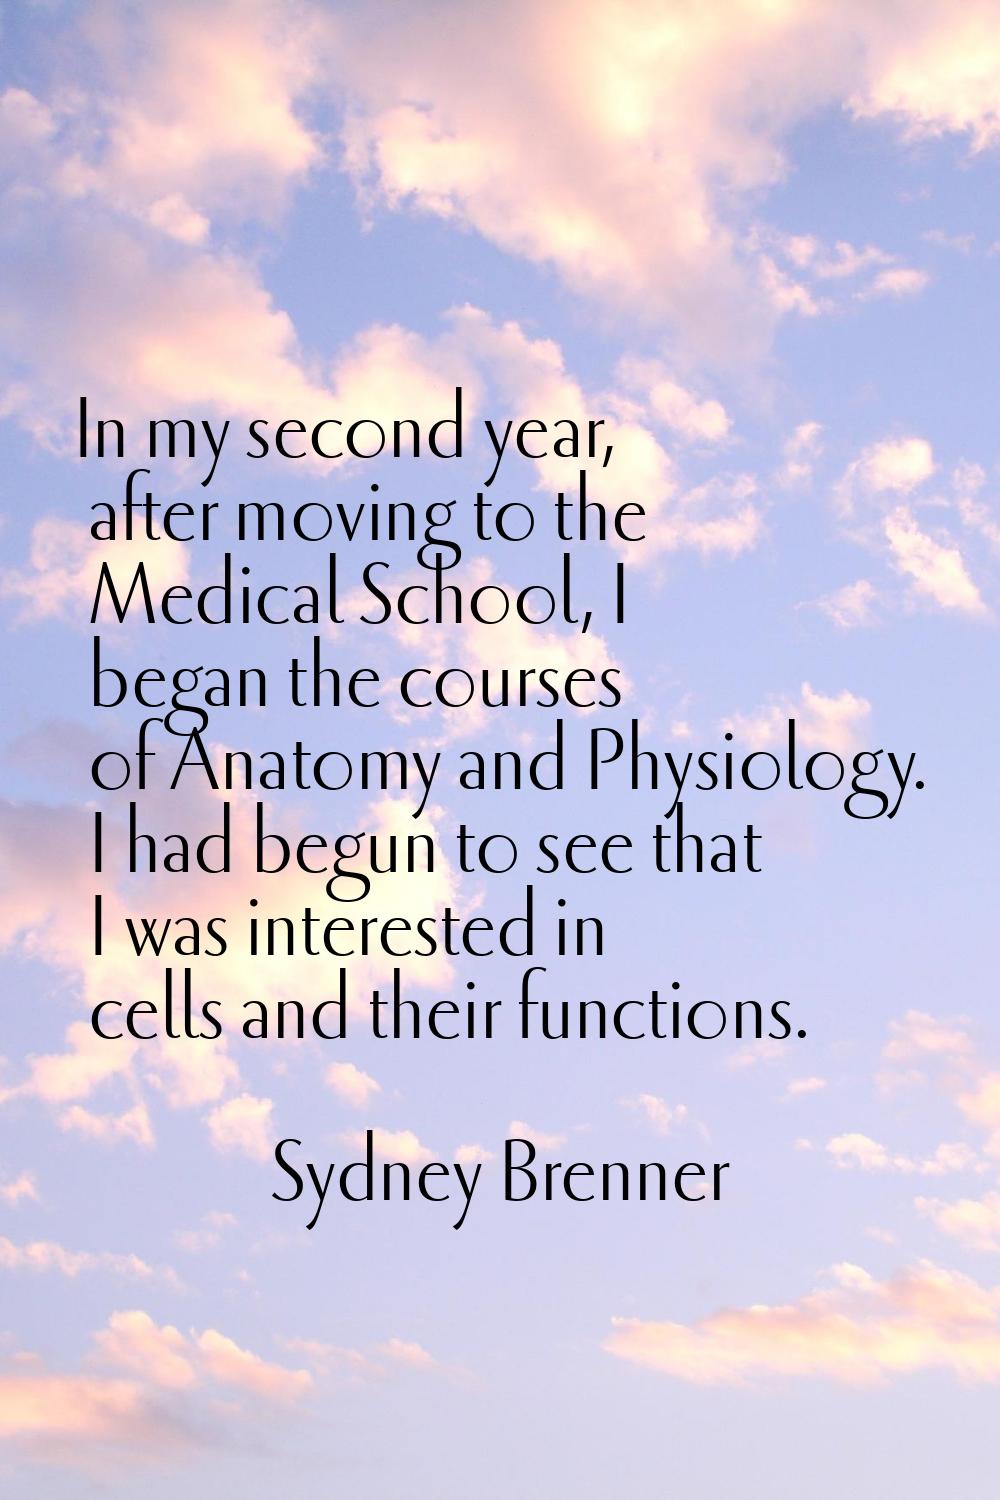 In my second year, after moving to the Medical School, I began the courses of Anatomy and Physiolog